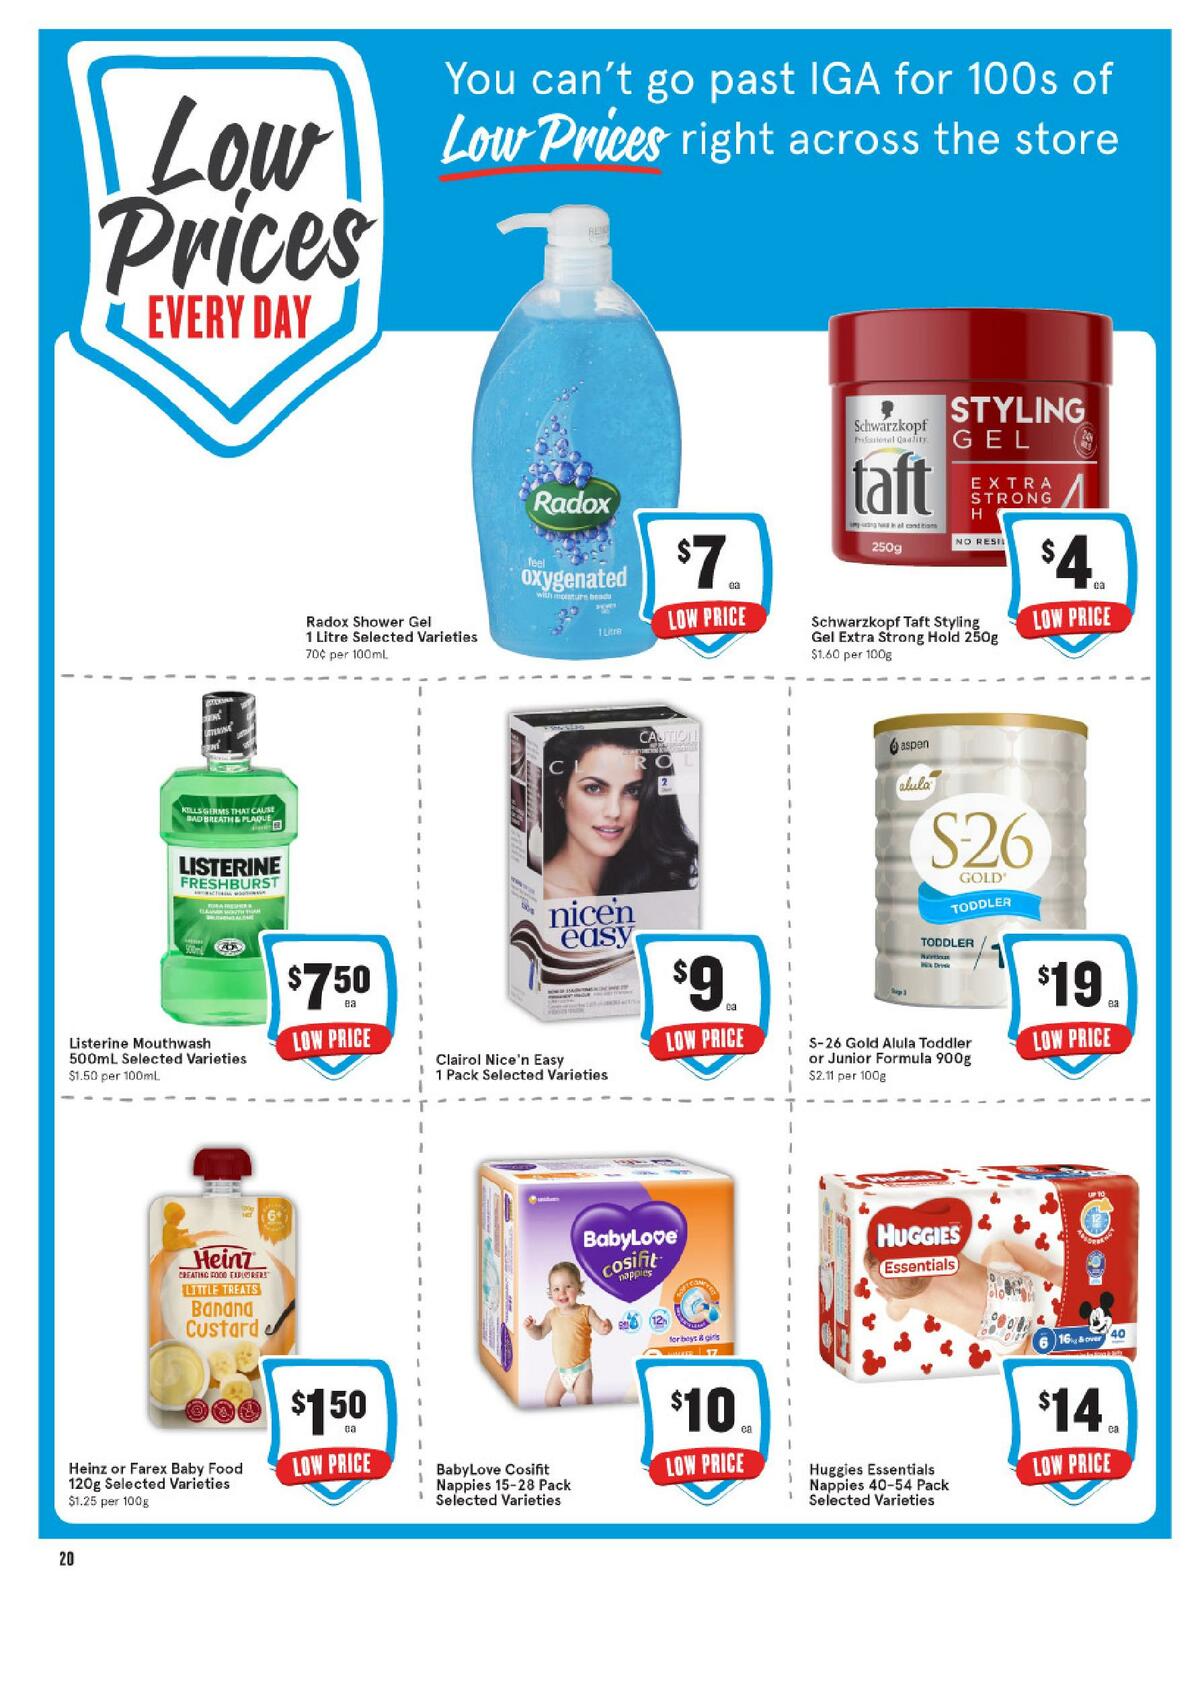 IGA Low Prices Every Day Catalogues from February 24